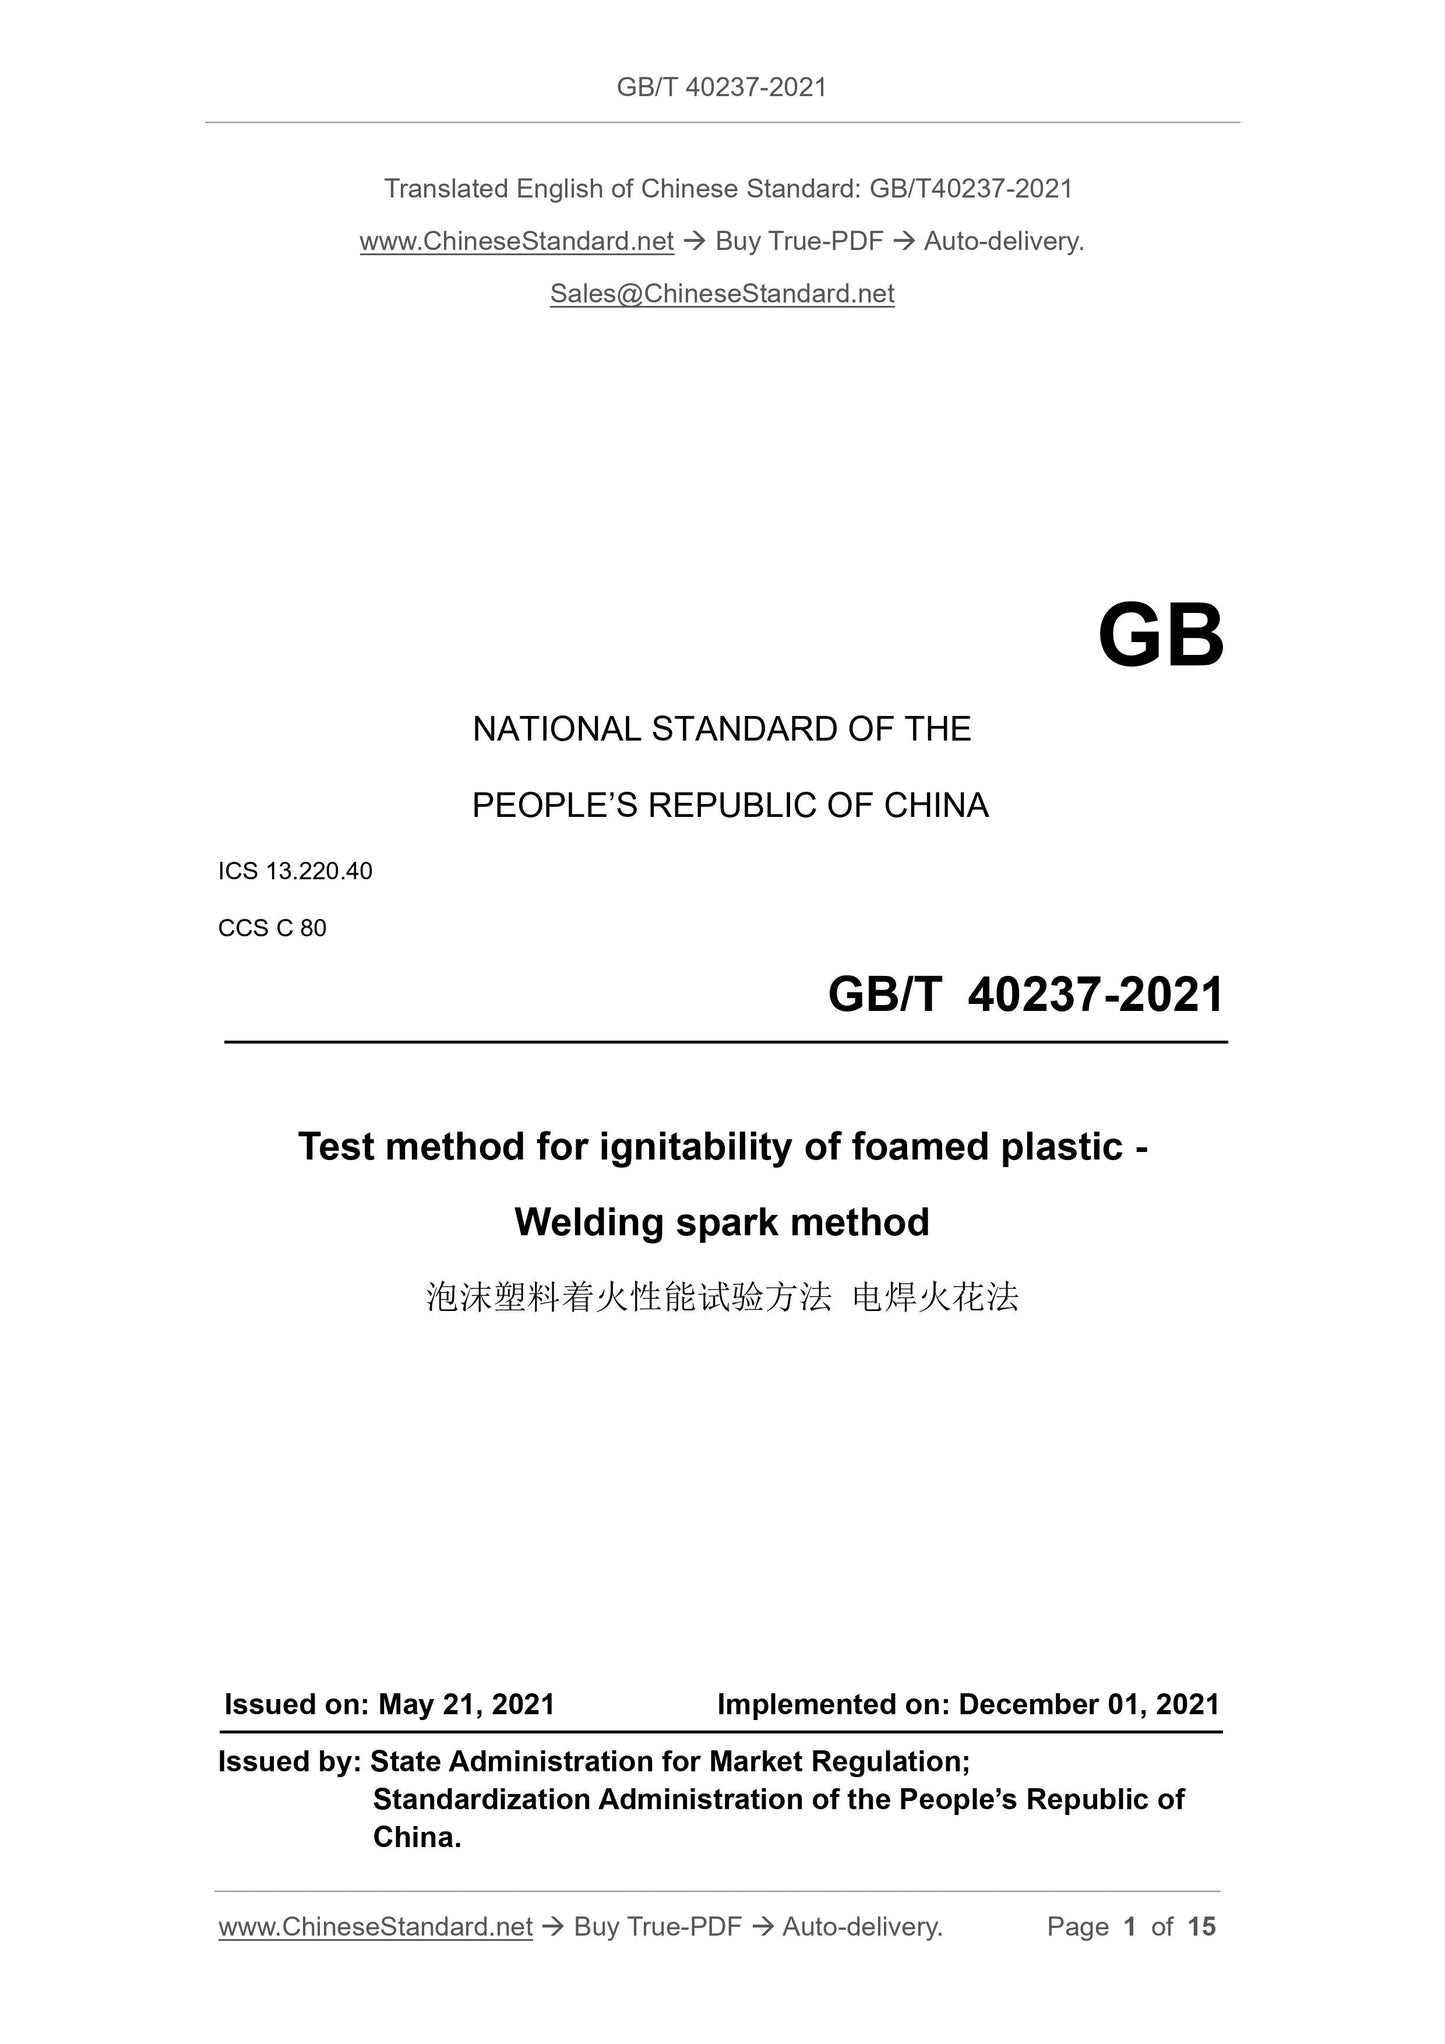 GB/T 40237-2021 Page 1